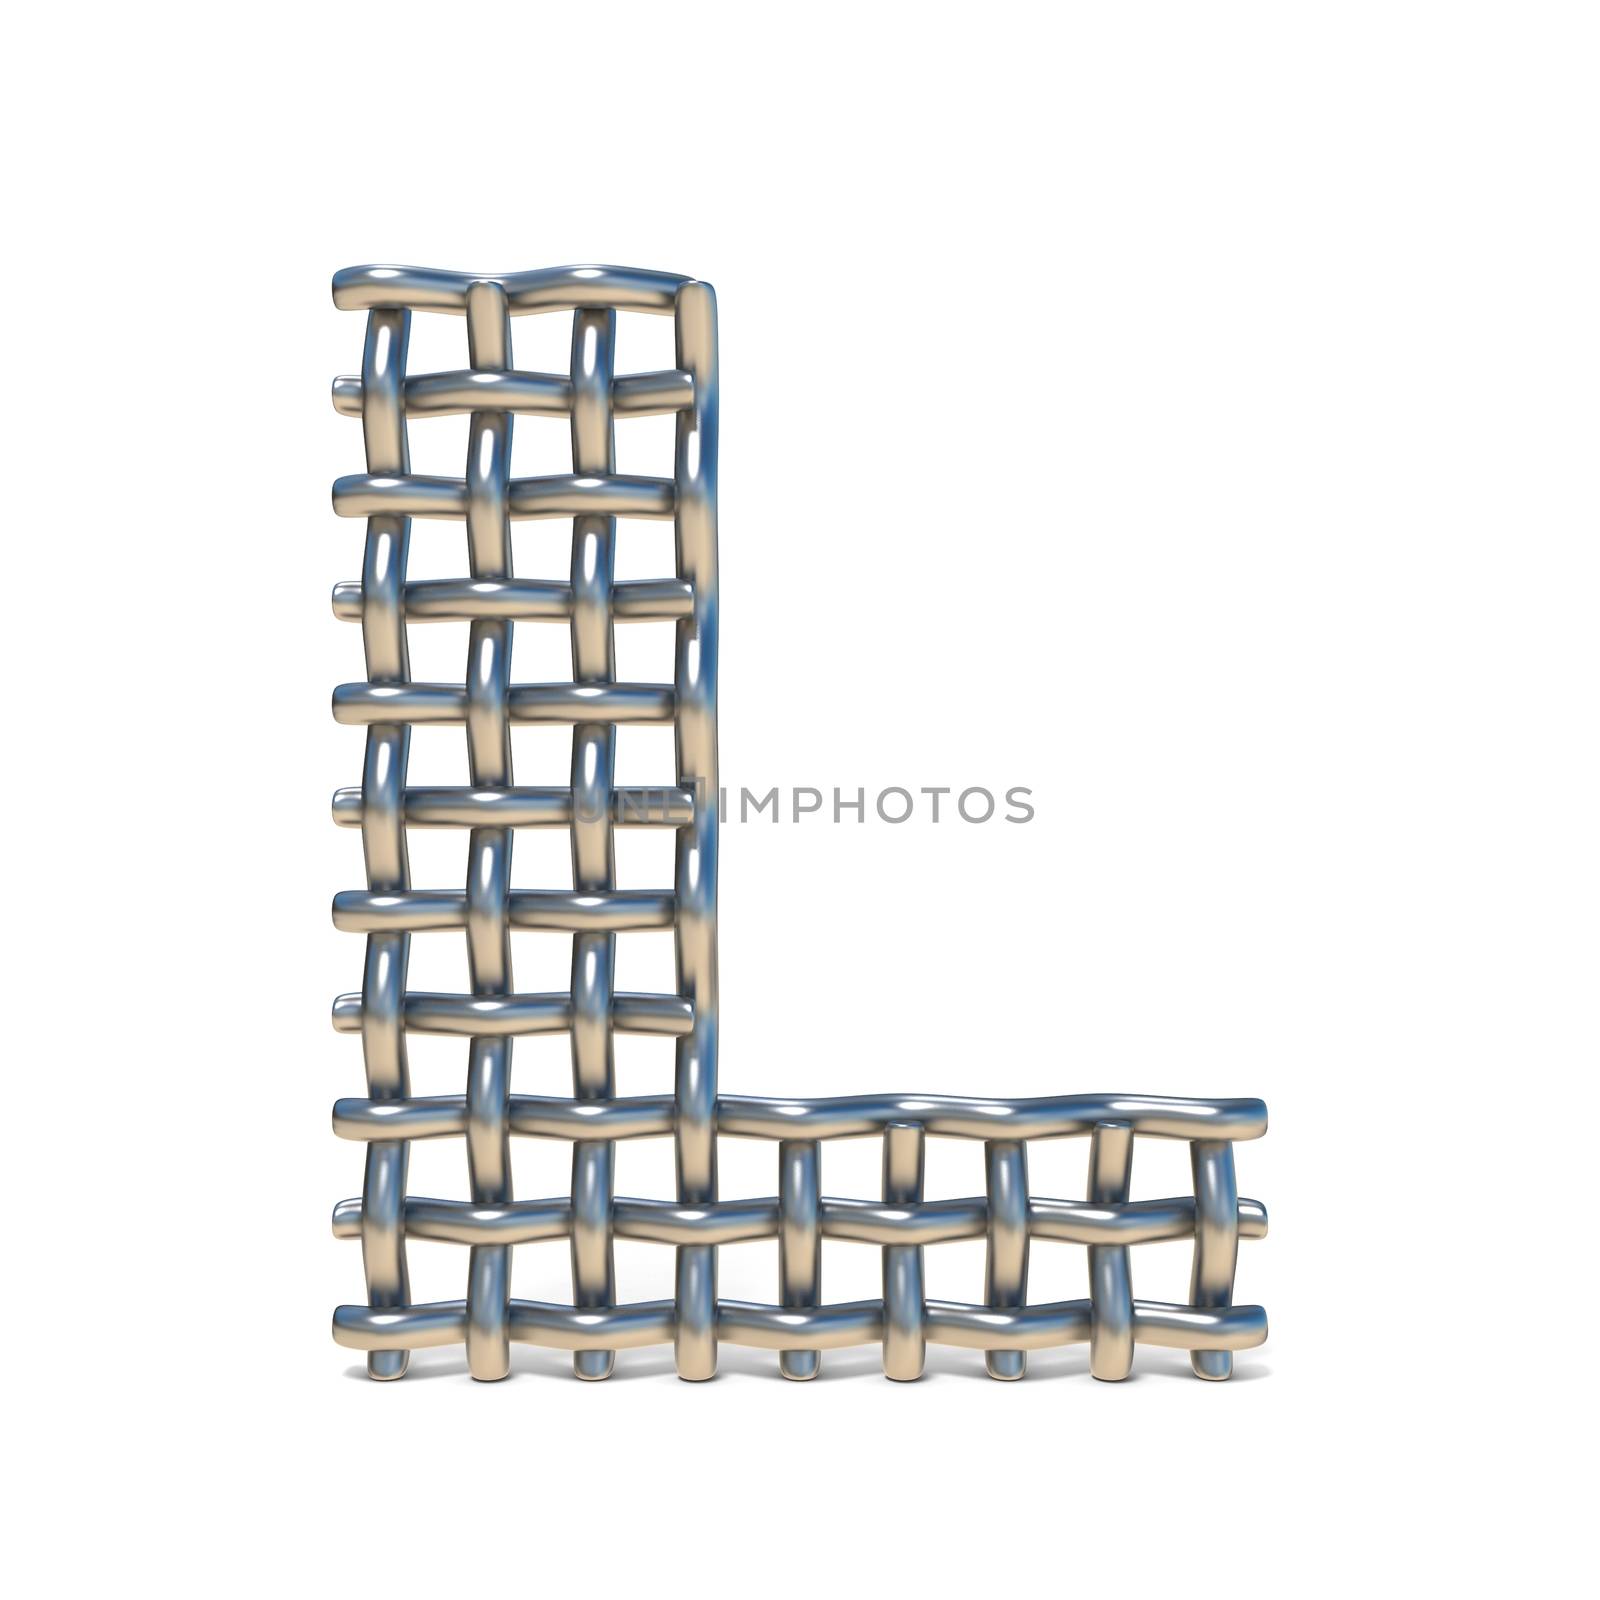 Metal wire mesh font LETTER L 3D render illustration isolated on white background